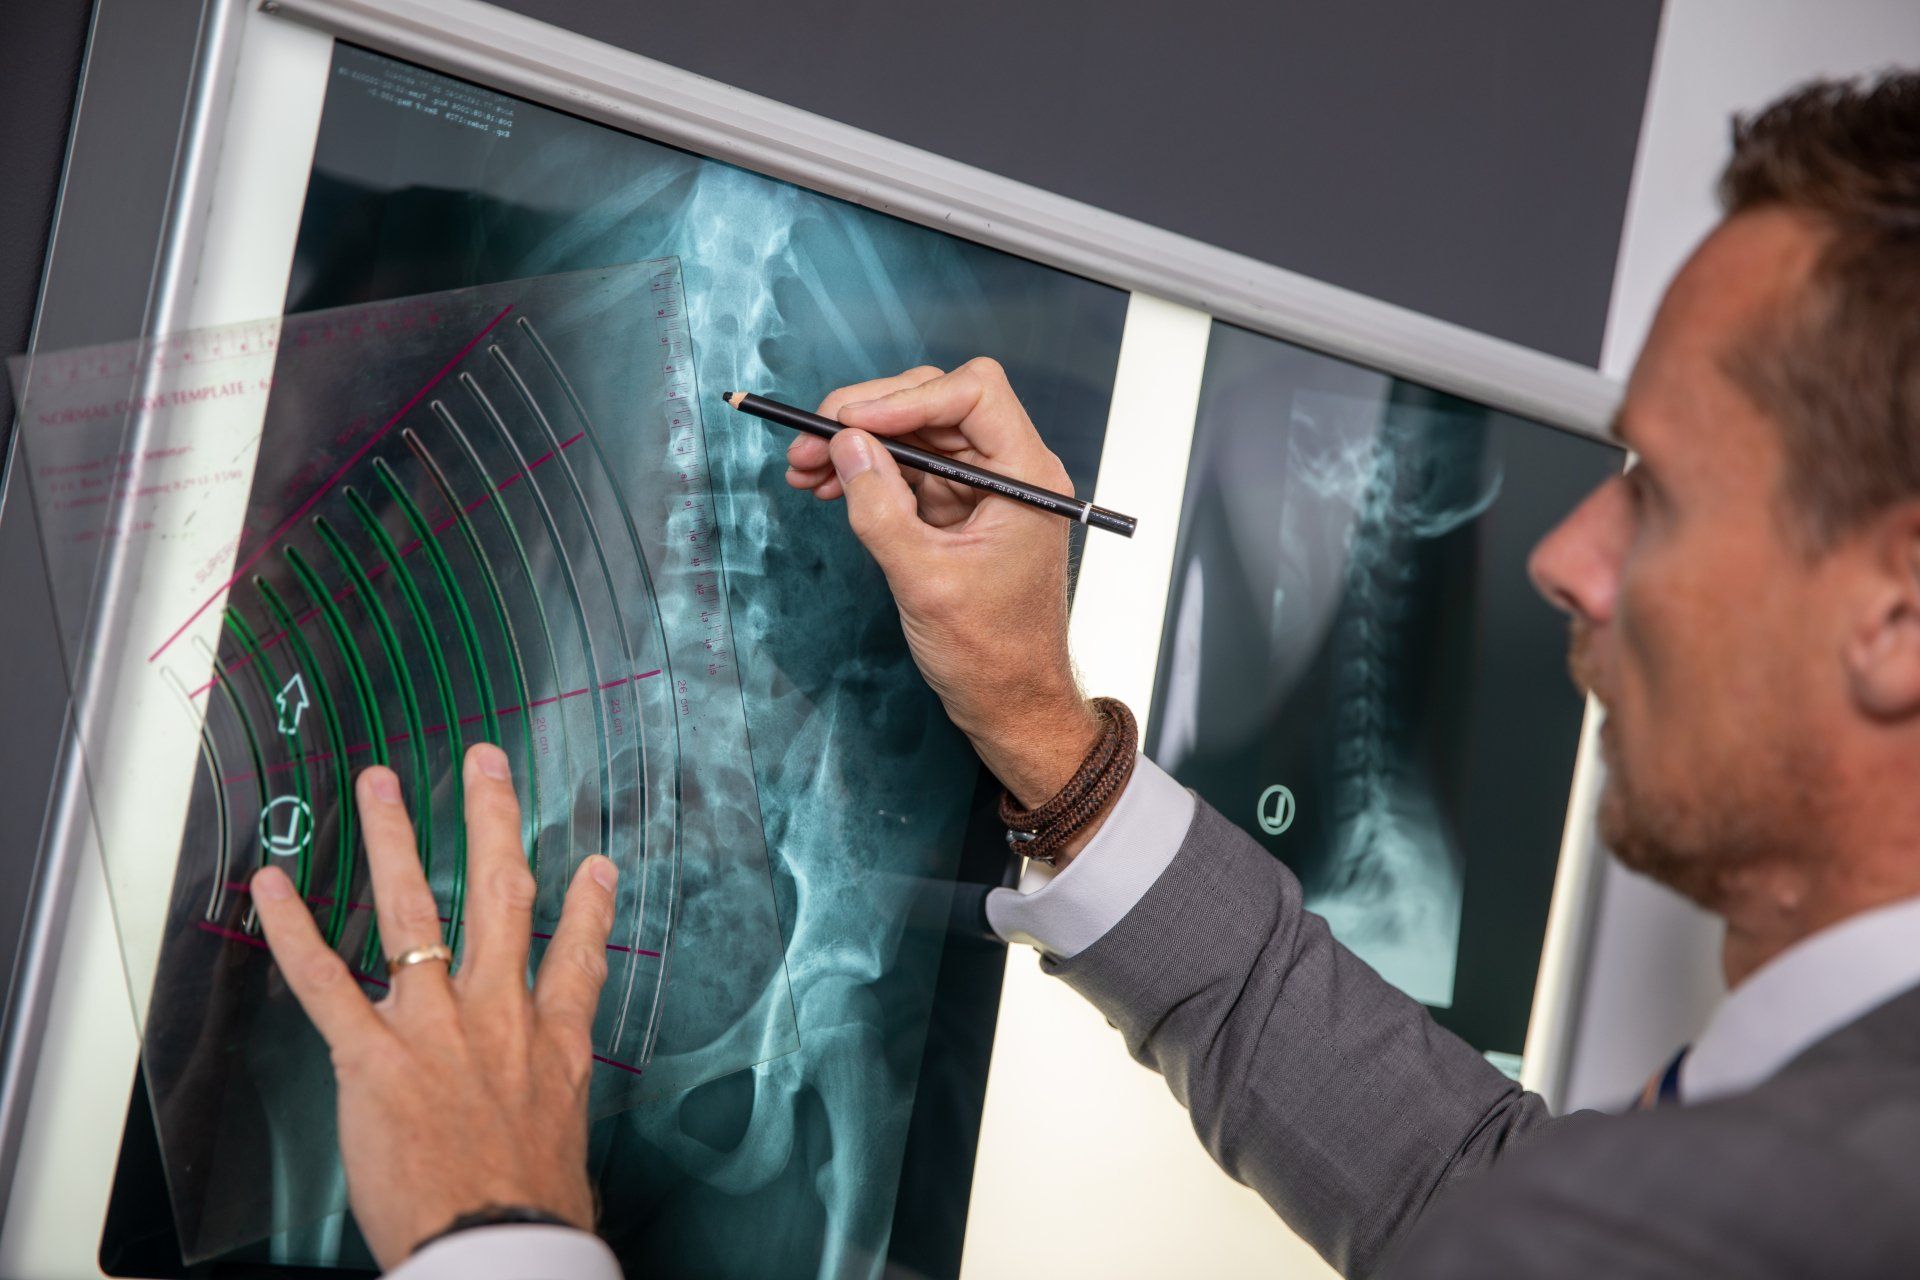 Chiro identifying issues on an xray